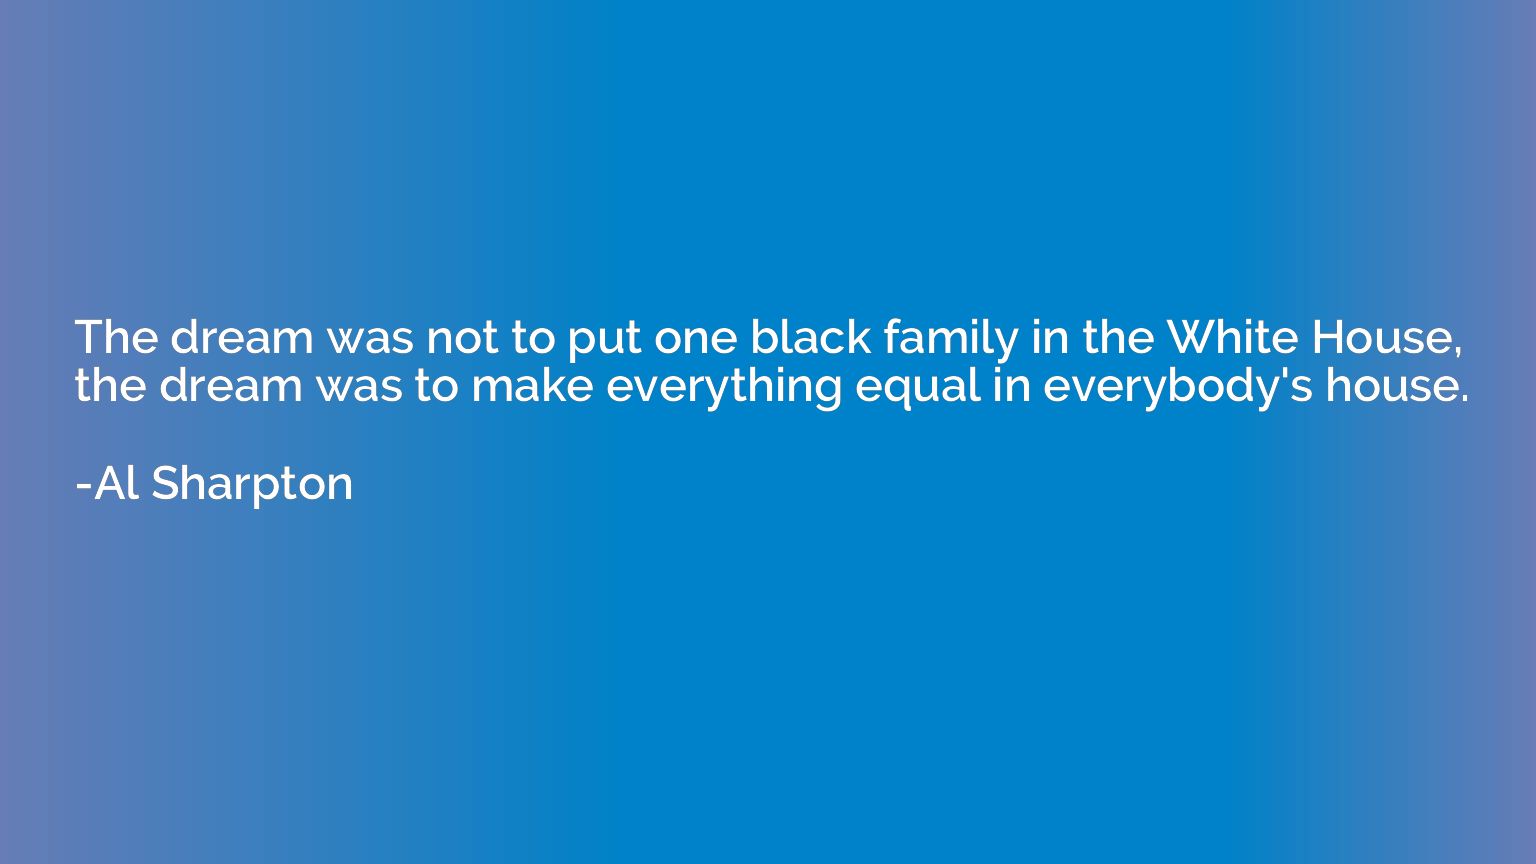 The dream was not to put one black family in the White House